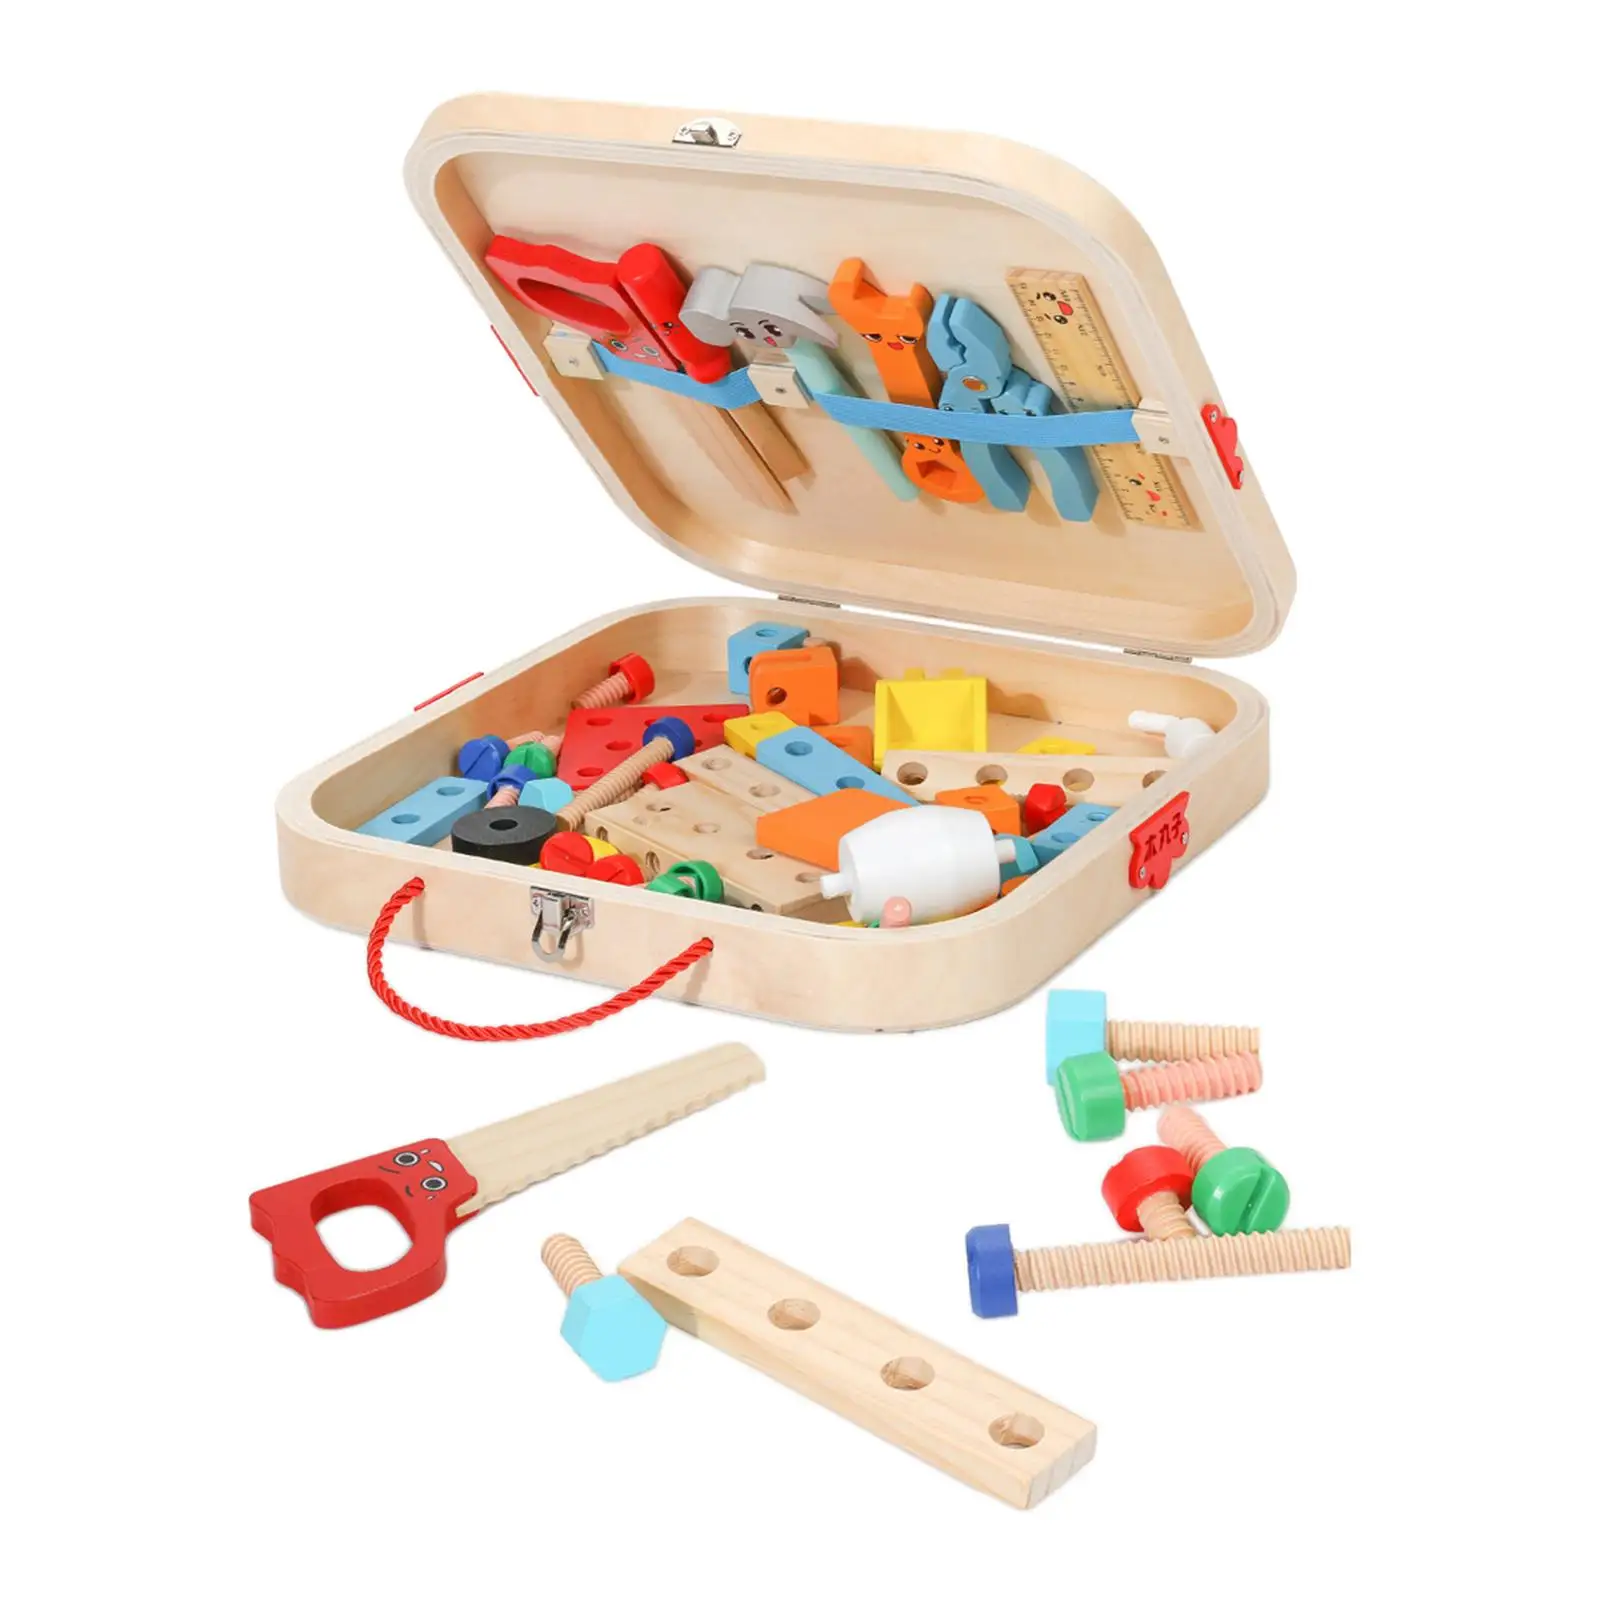 Wooden Kid Tool Set Develops Fine Motor Skills Smooth Construction Tool Toy Set for Living Room Home Bedroom Birthday Gift Kids